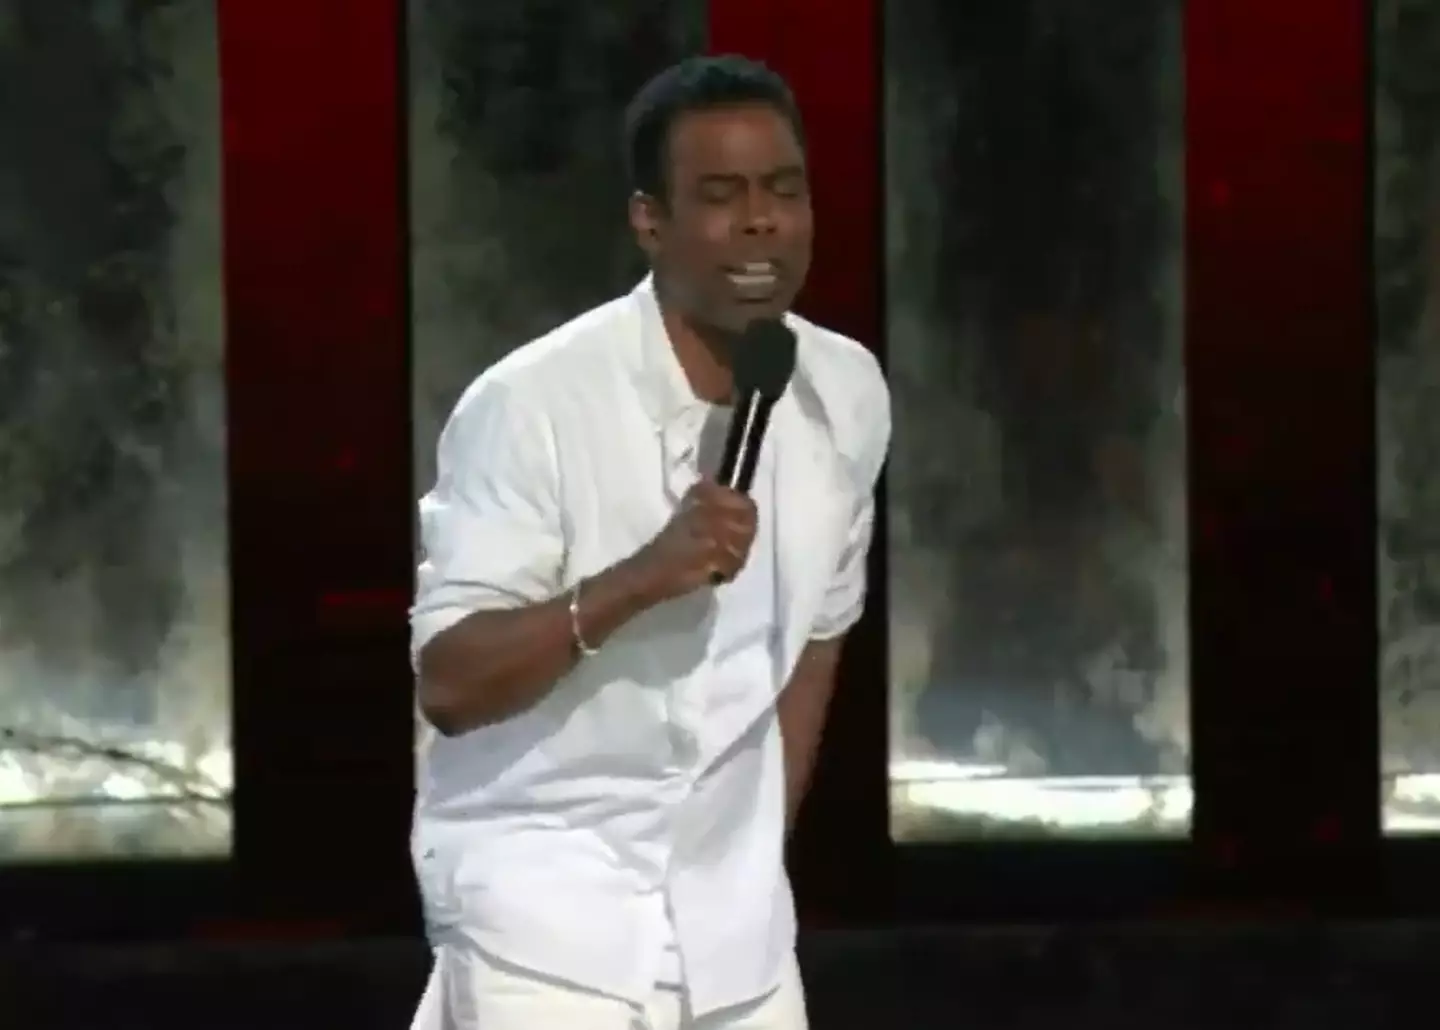 Chris Rock joked about Will Smith's career, but messed up the joke.